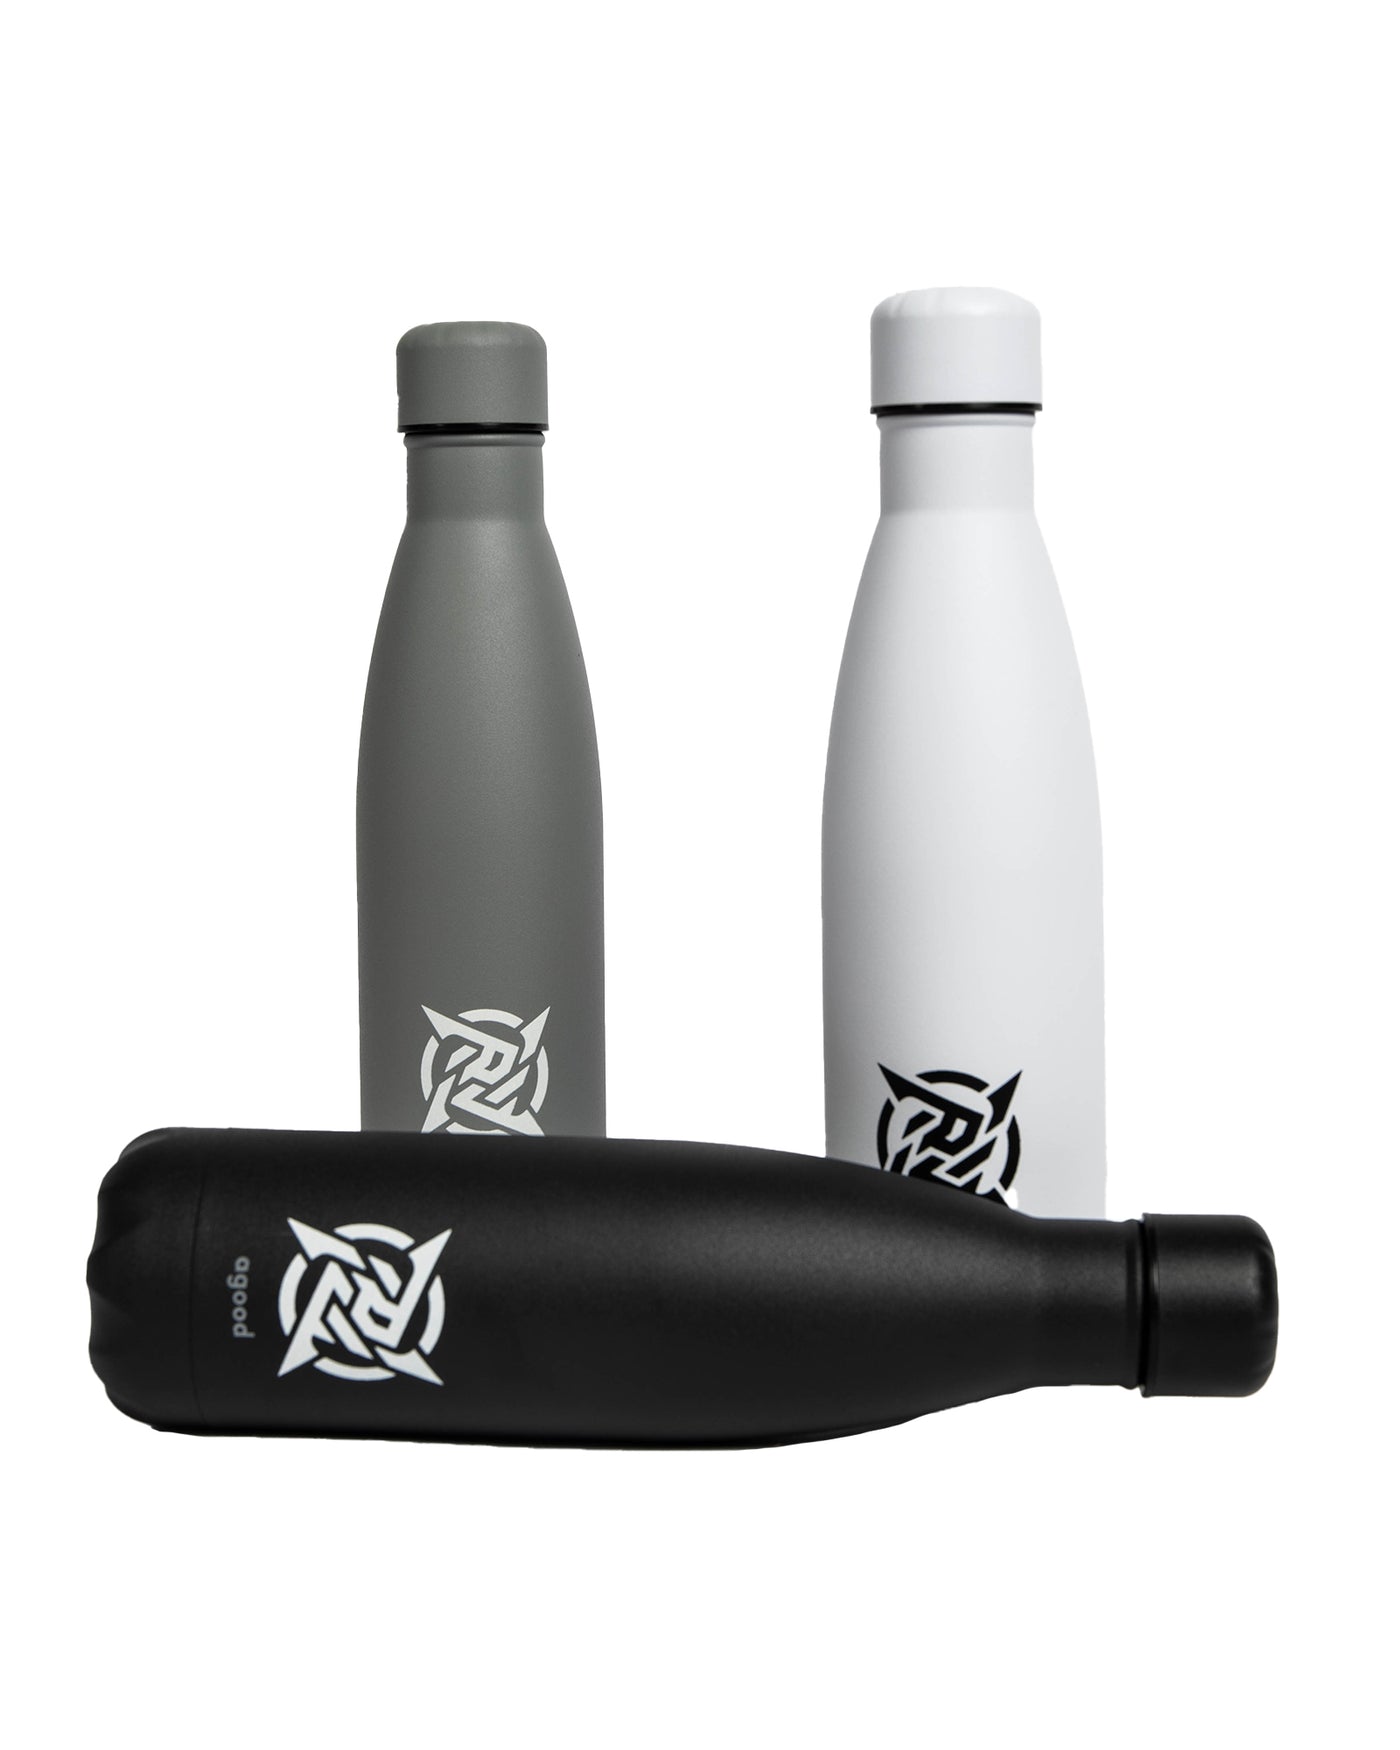 Lagom Water Bottle - White from Ninjas in Pyjamas Shop. A white water bottle from the Lagom Merch Collection, featuring the Ninjas in Pyjamas logo in white. This durable and stylish water bottle is perfect for staying hydrated on the go while showcasing your support for NIP.